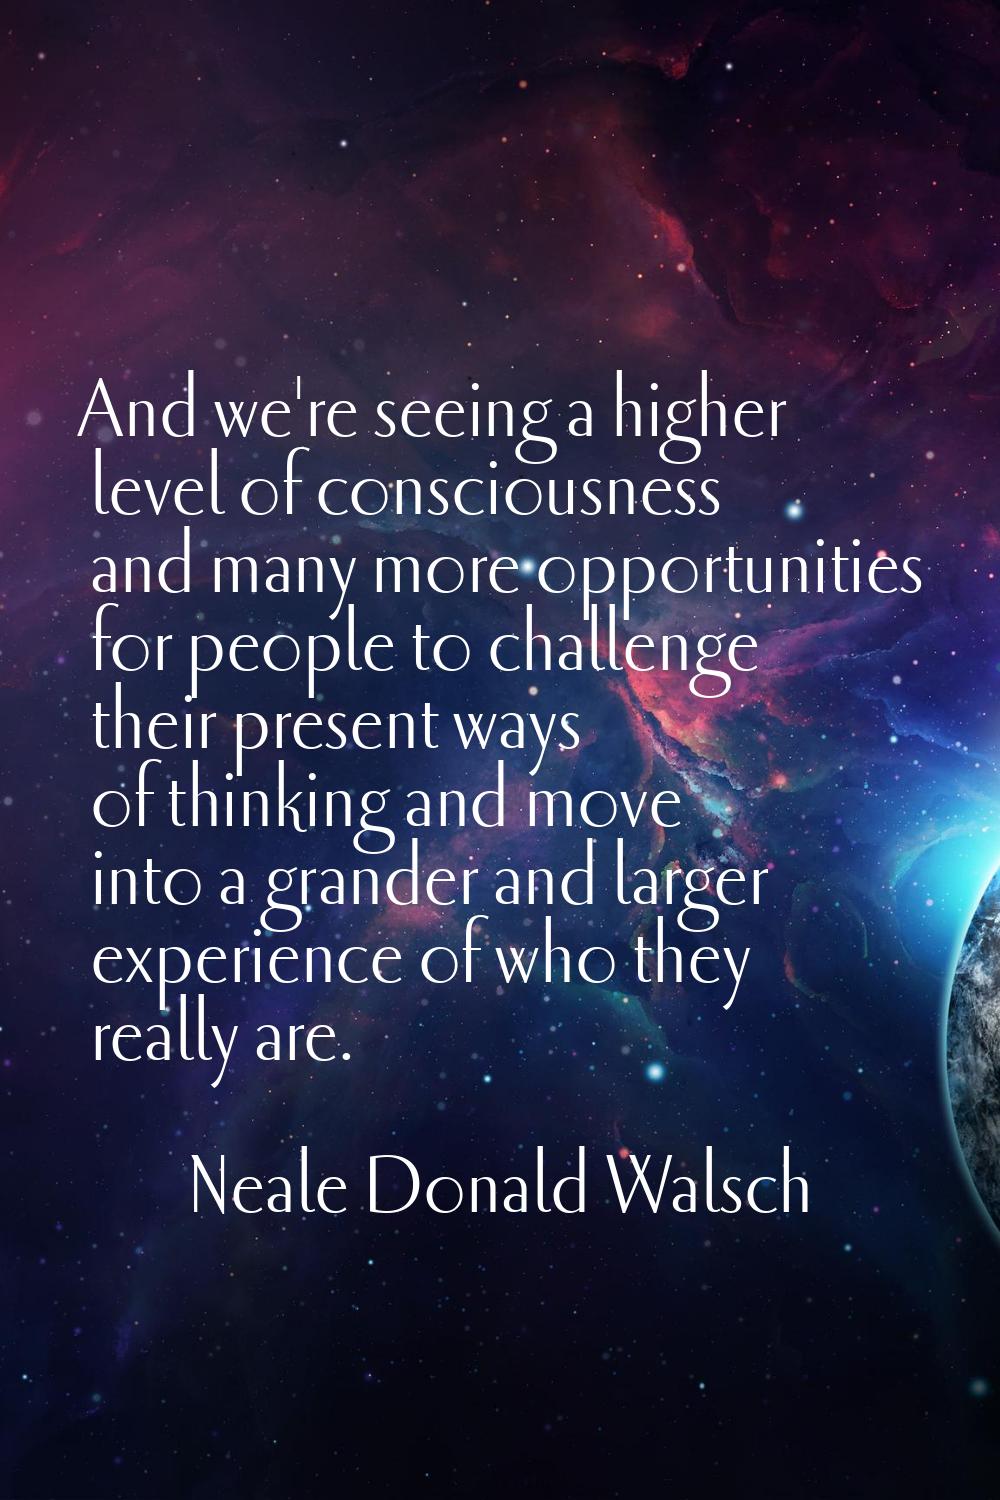 And we're seeing a higher level of consciousness and many more opportunities for people to challeng